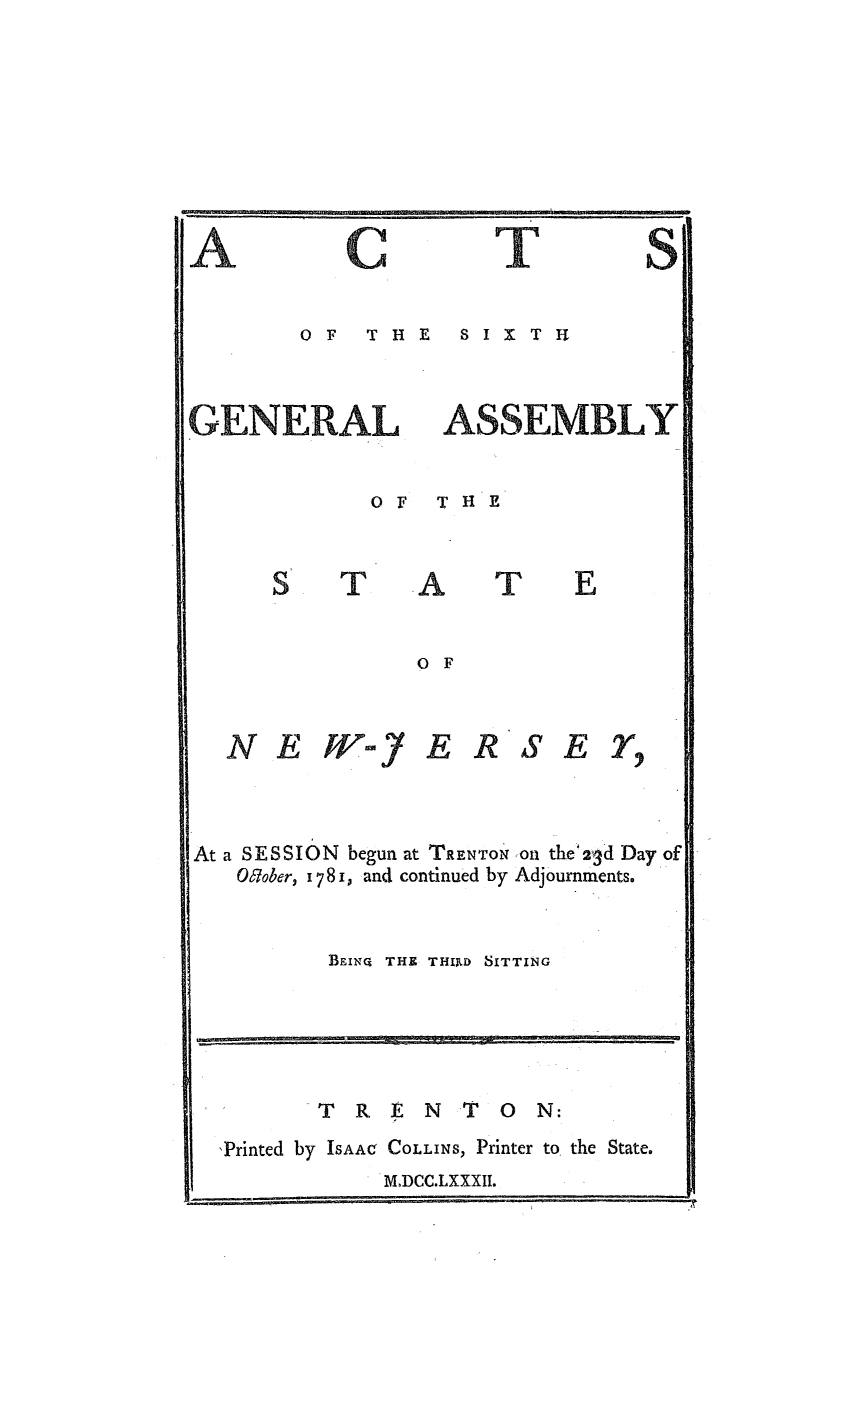 handle is hein.ssl/ssnj0236 and id is 1 raw text is: -u

C    T
0OF  T HE  SIX1T H

ASSEMBLY

OF  THE

T

A

T

O F

N EW-jf

E RSE,

At a SESSION begun at TRENTON on the'23d Day of
O67ober, 1781, and continued by Adjournments.
BEINQ THE THIRD SITTING

TRENT O              N:
'Printed by ISAAc COLLINS, Printer to the State.
M.DCC.LXXXII.

I

A

GENERAL


